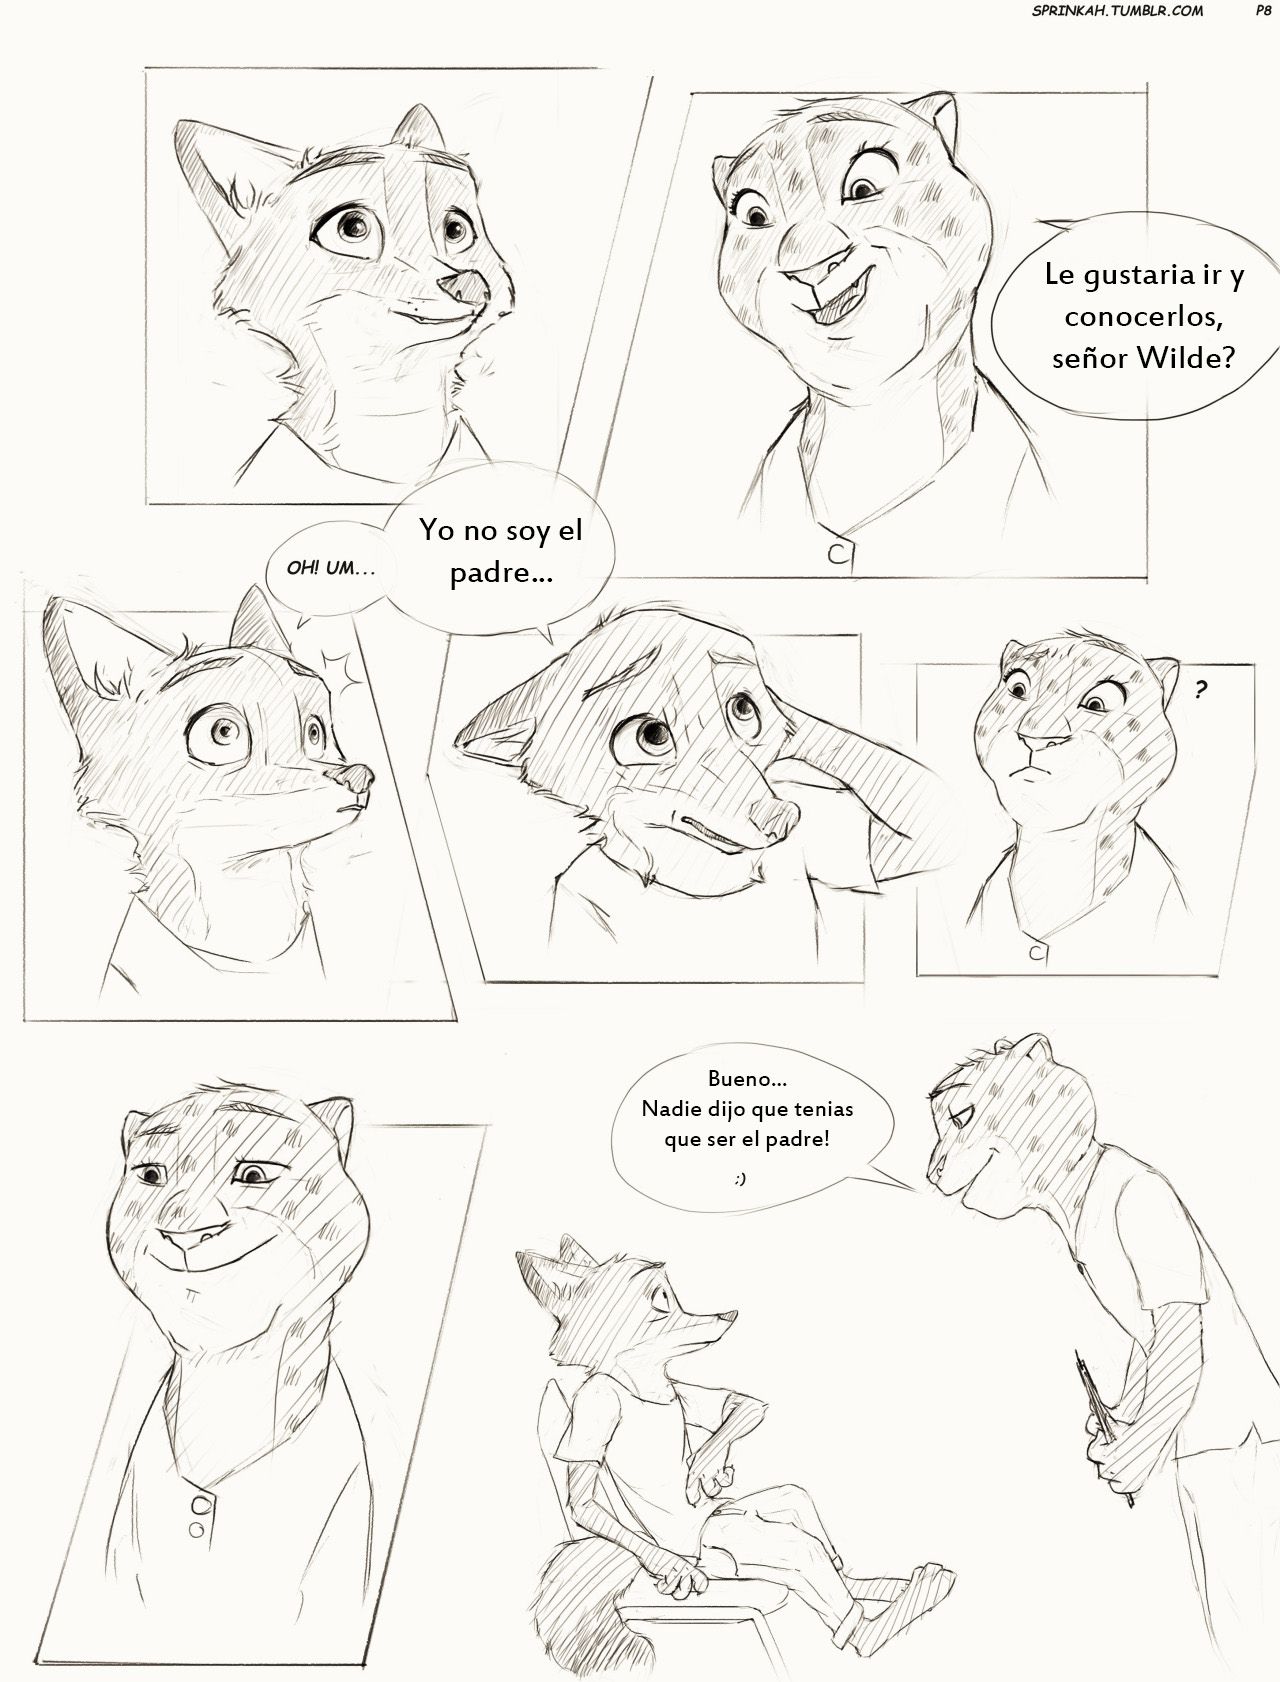 [Sprinkah] This is what true love looks like (Zootopia) (Spanish) (On Going) [Landsec] http://sprinkah.tumblr.com/ 13